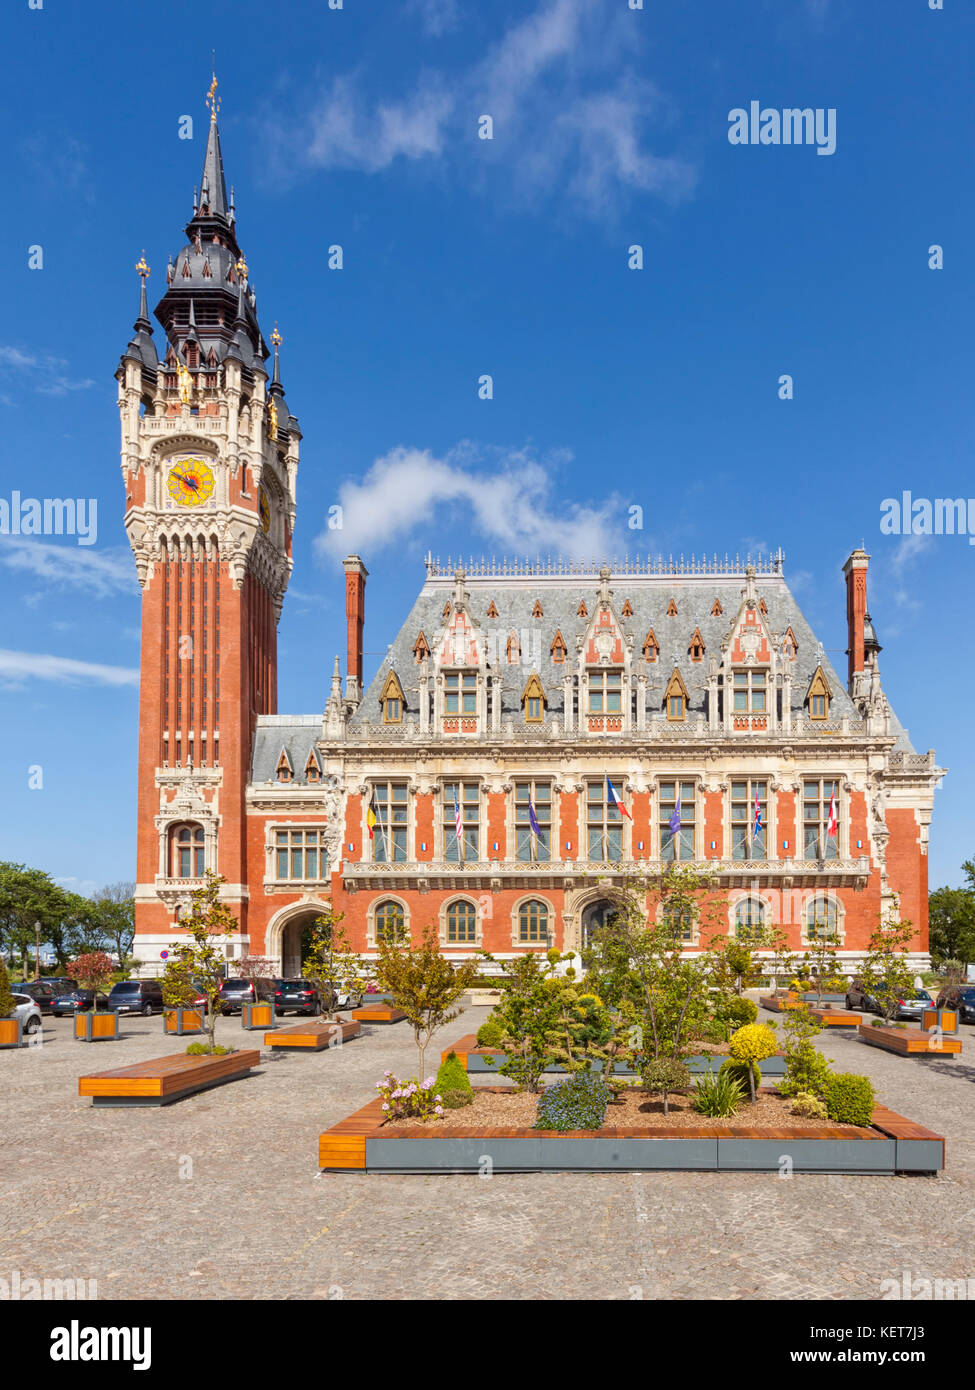 The historic town hall of Calais, France Stock Photo - Alamy